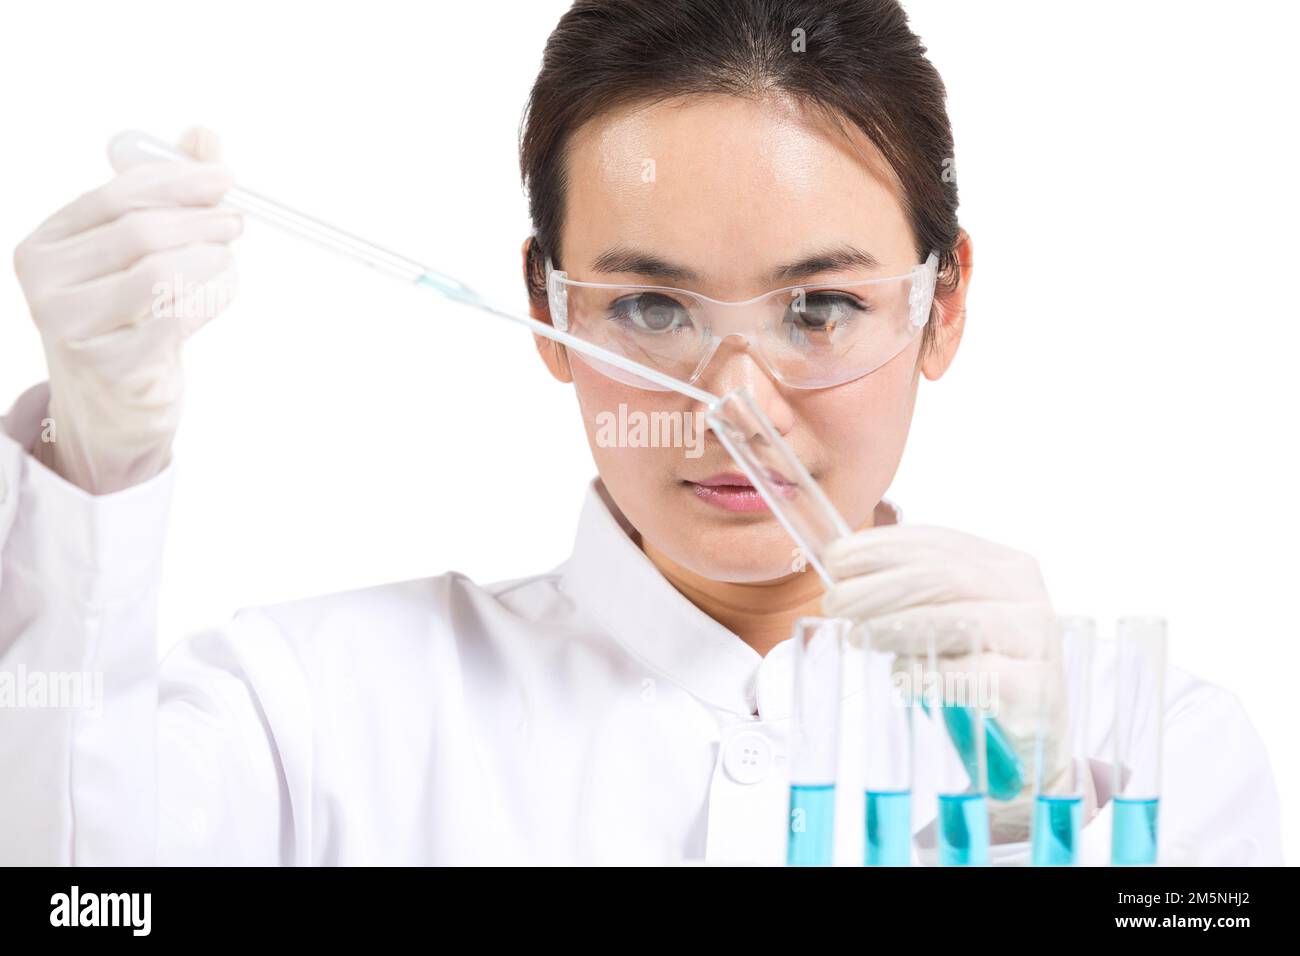 The reagent women scientists observed in vitro Stock Photo